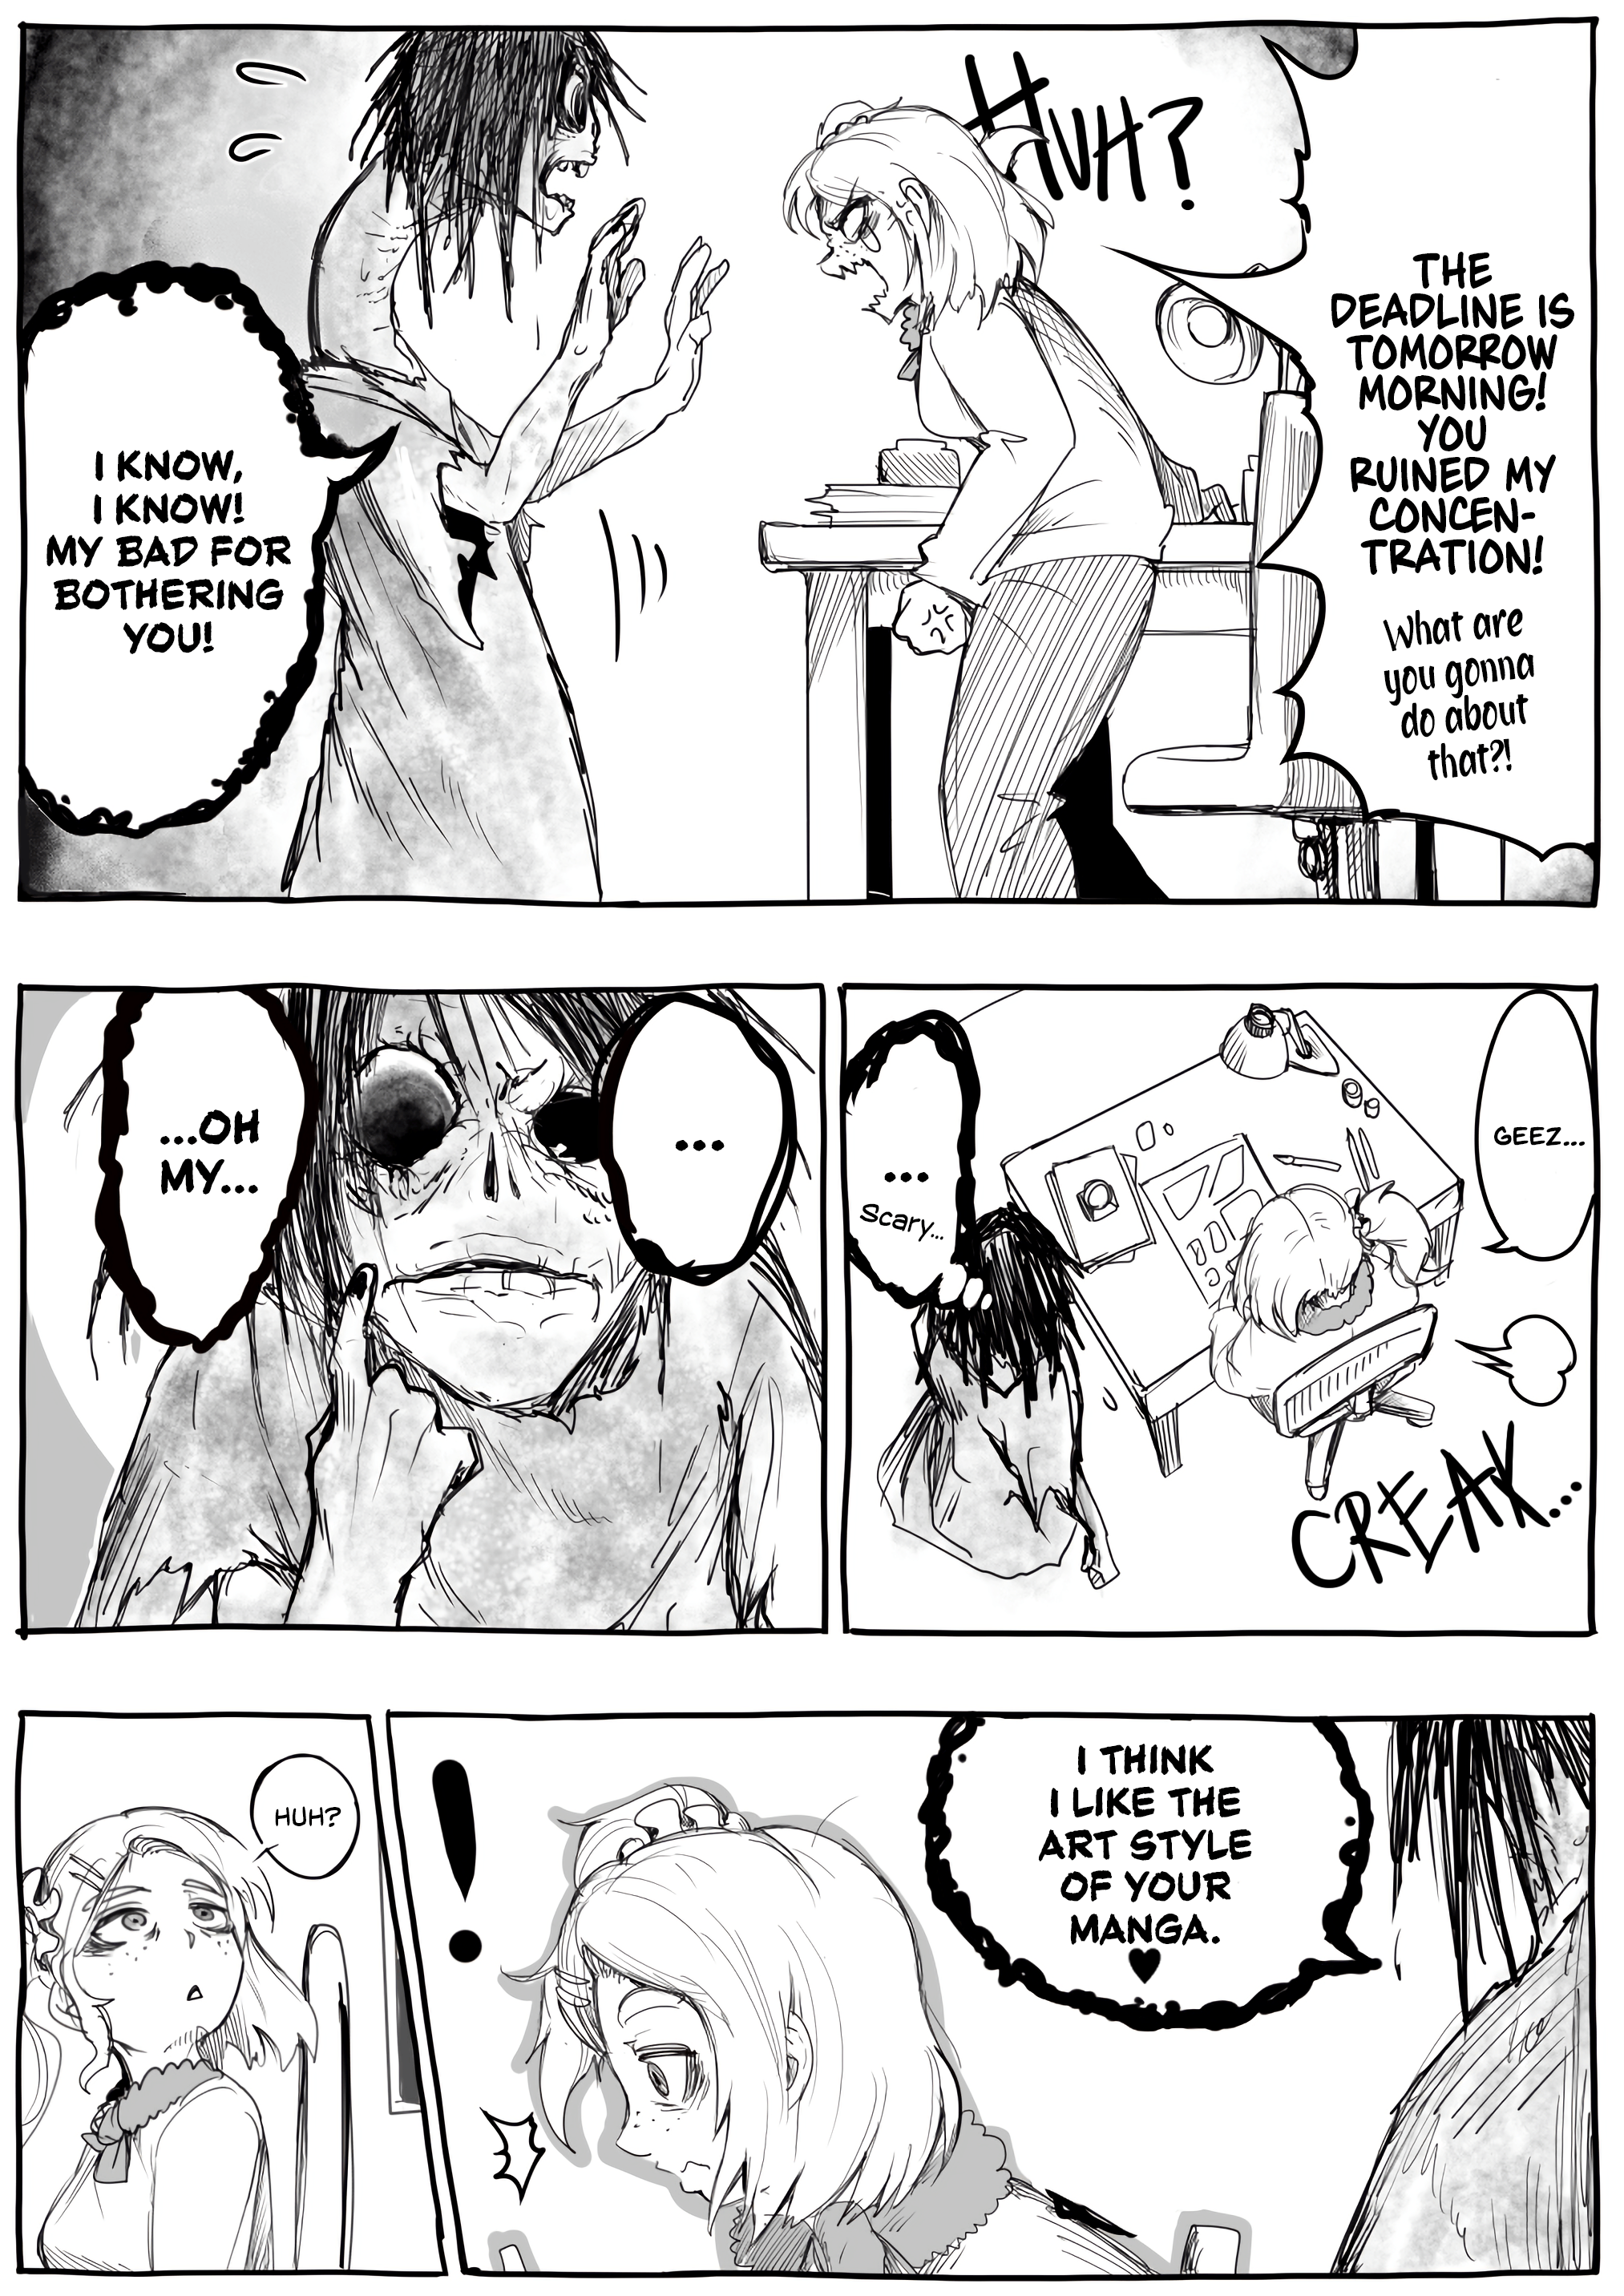 A Mangaka At The Night Before The Deadline - chapter 1 - #3